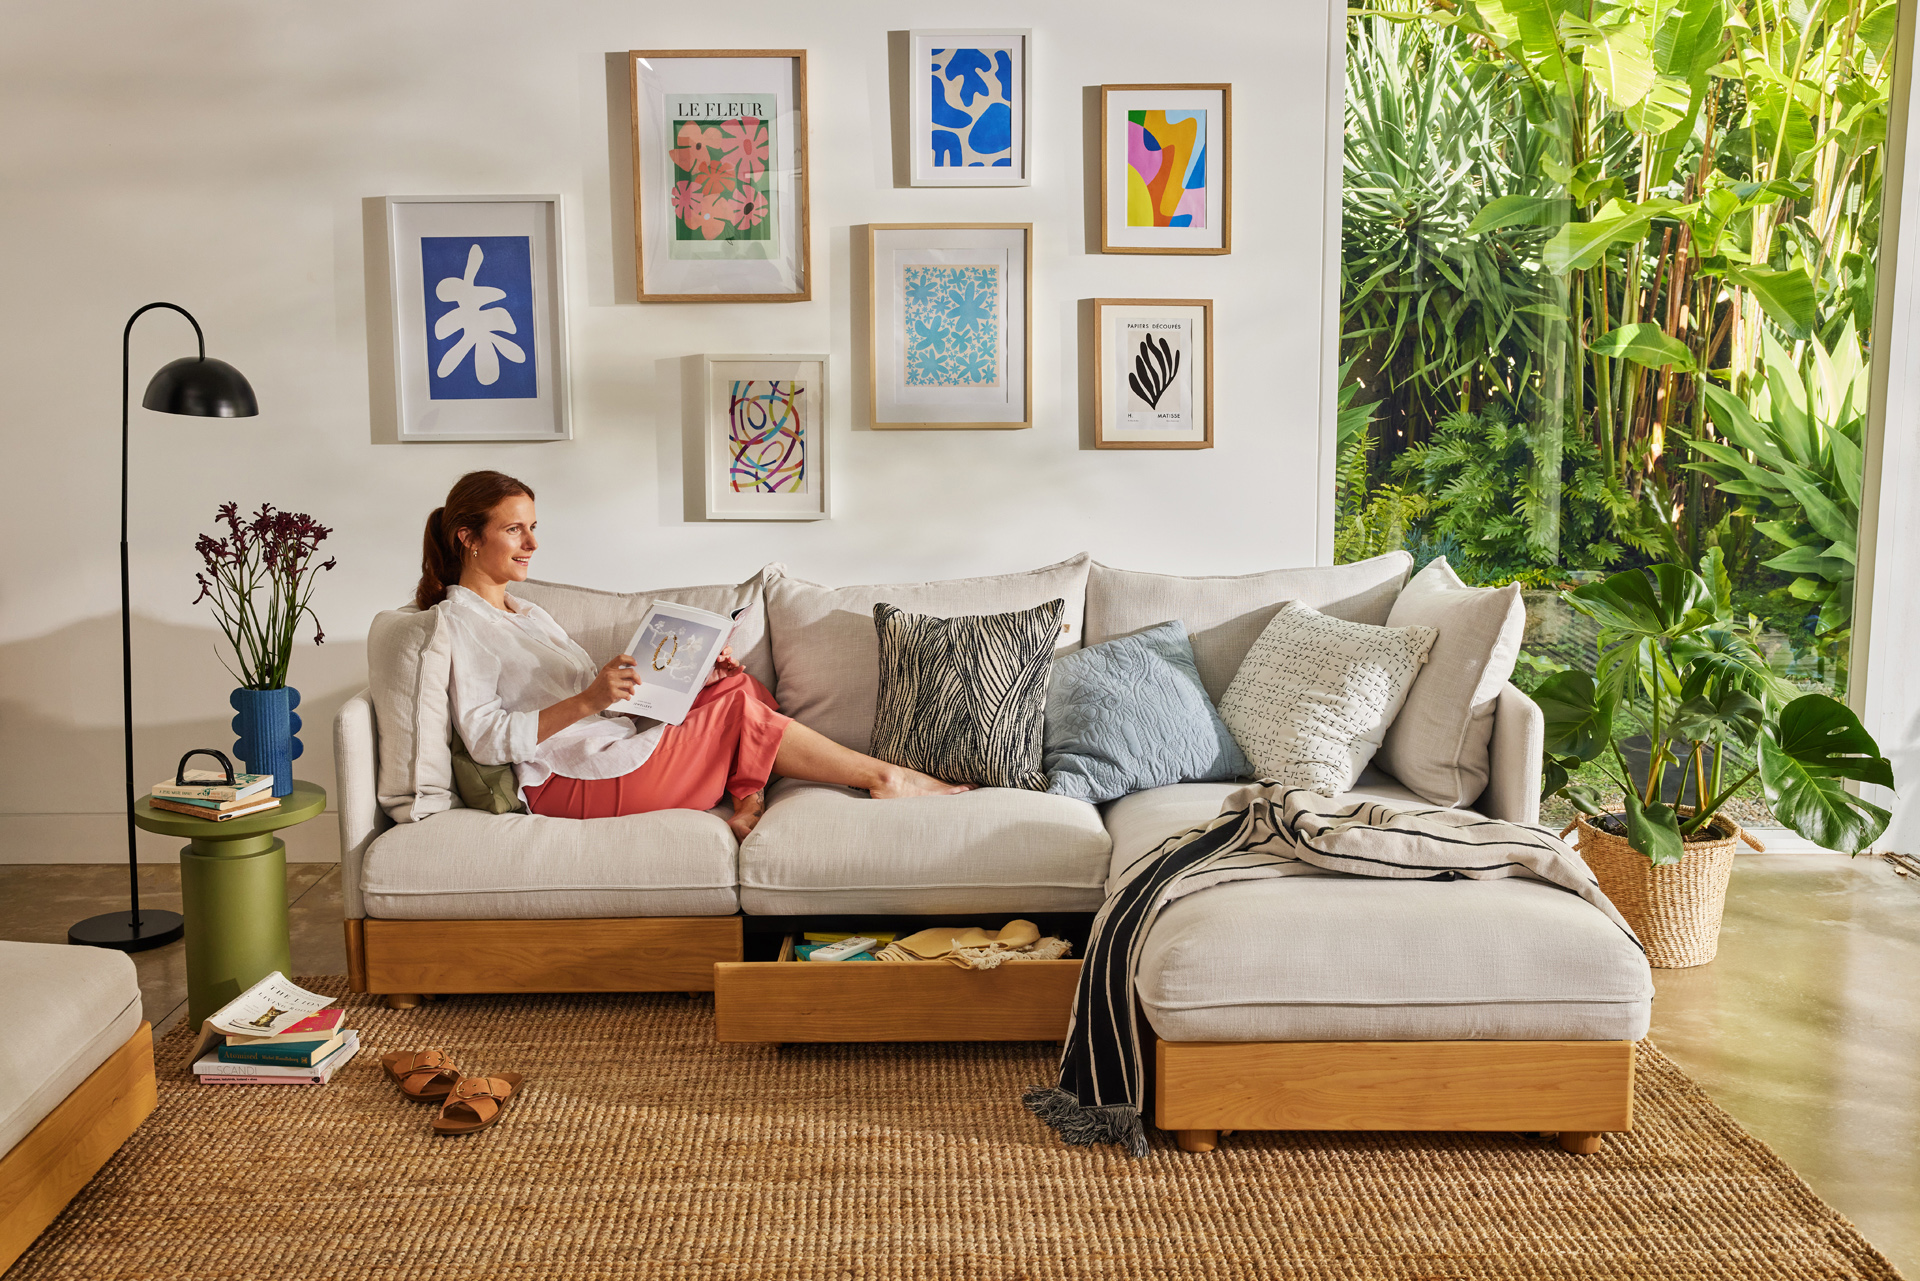 A woman relaxes on a Koala sofa with chaise as she reads a book in a bright and clean lounge room